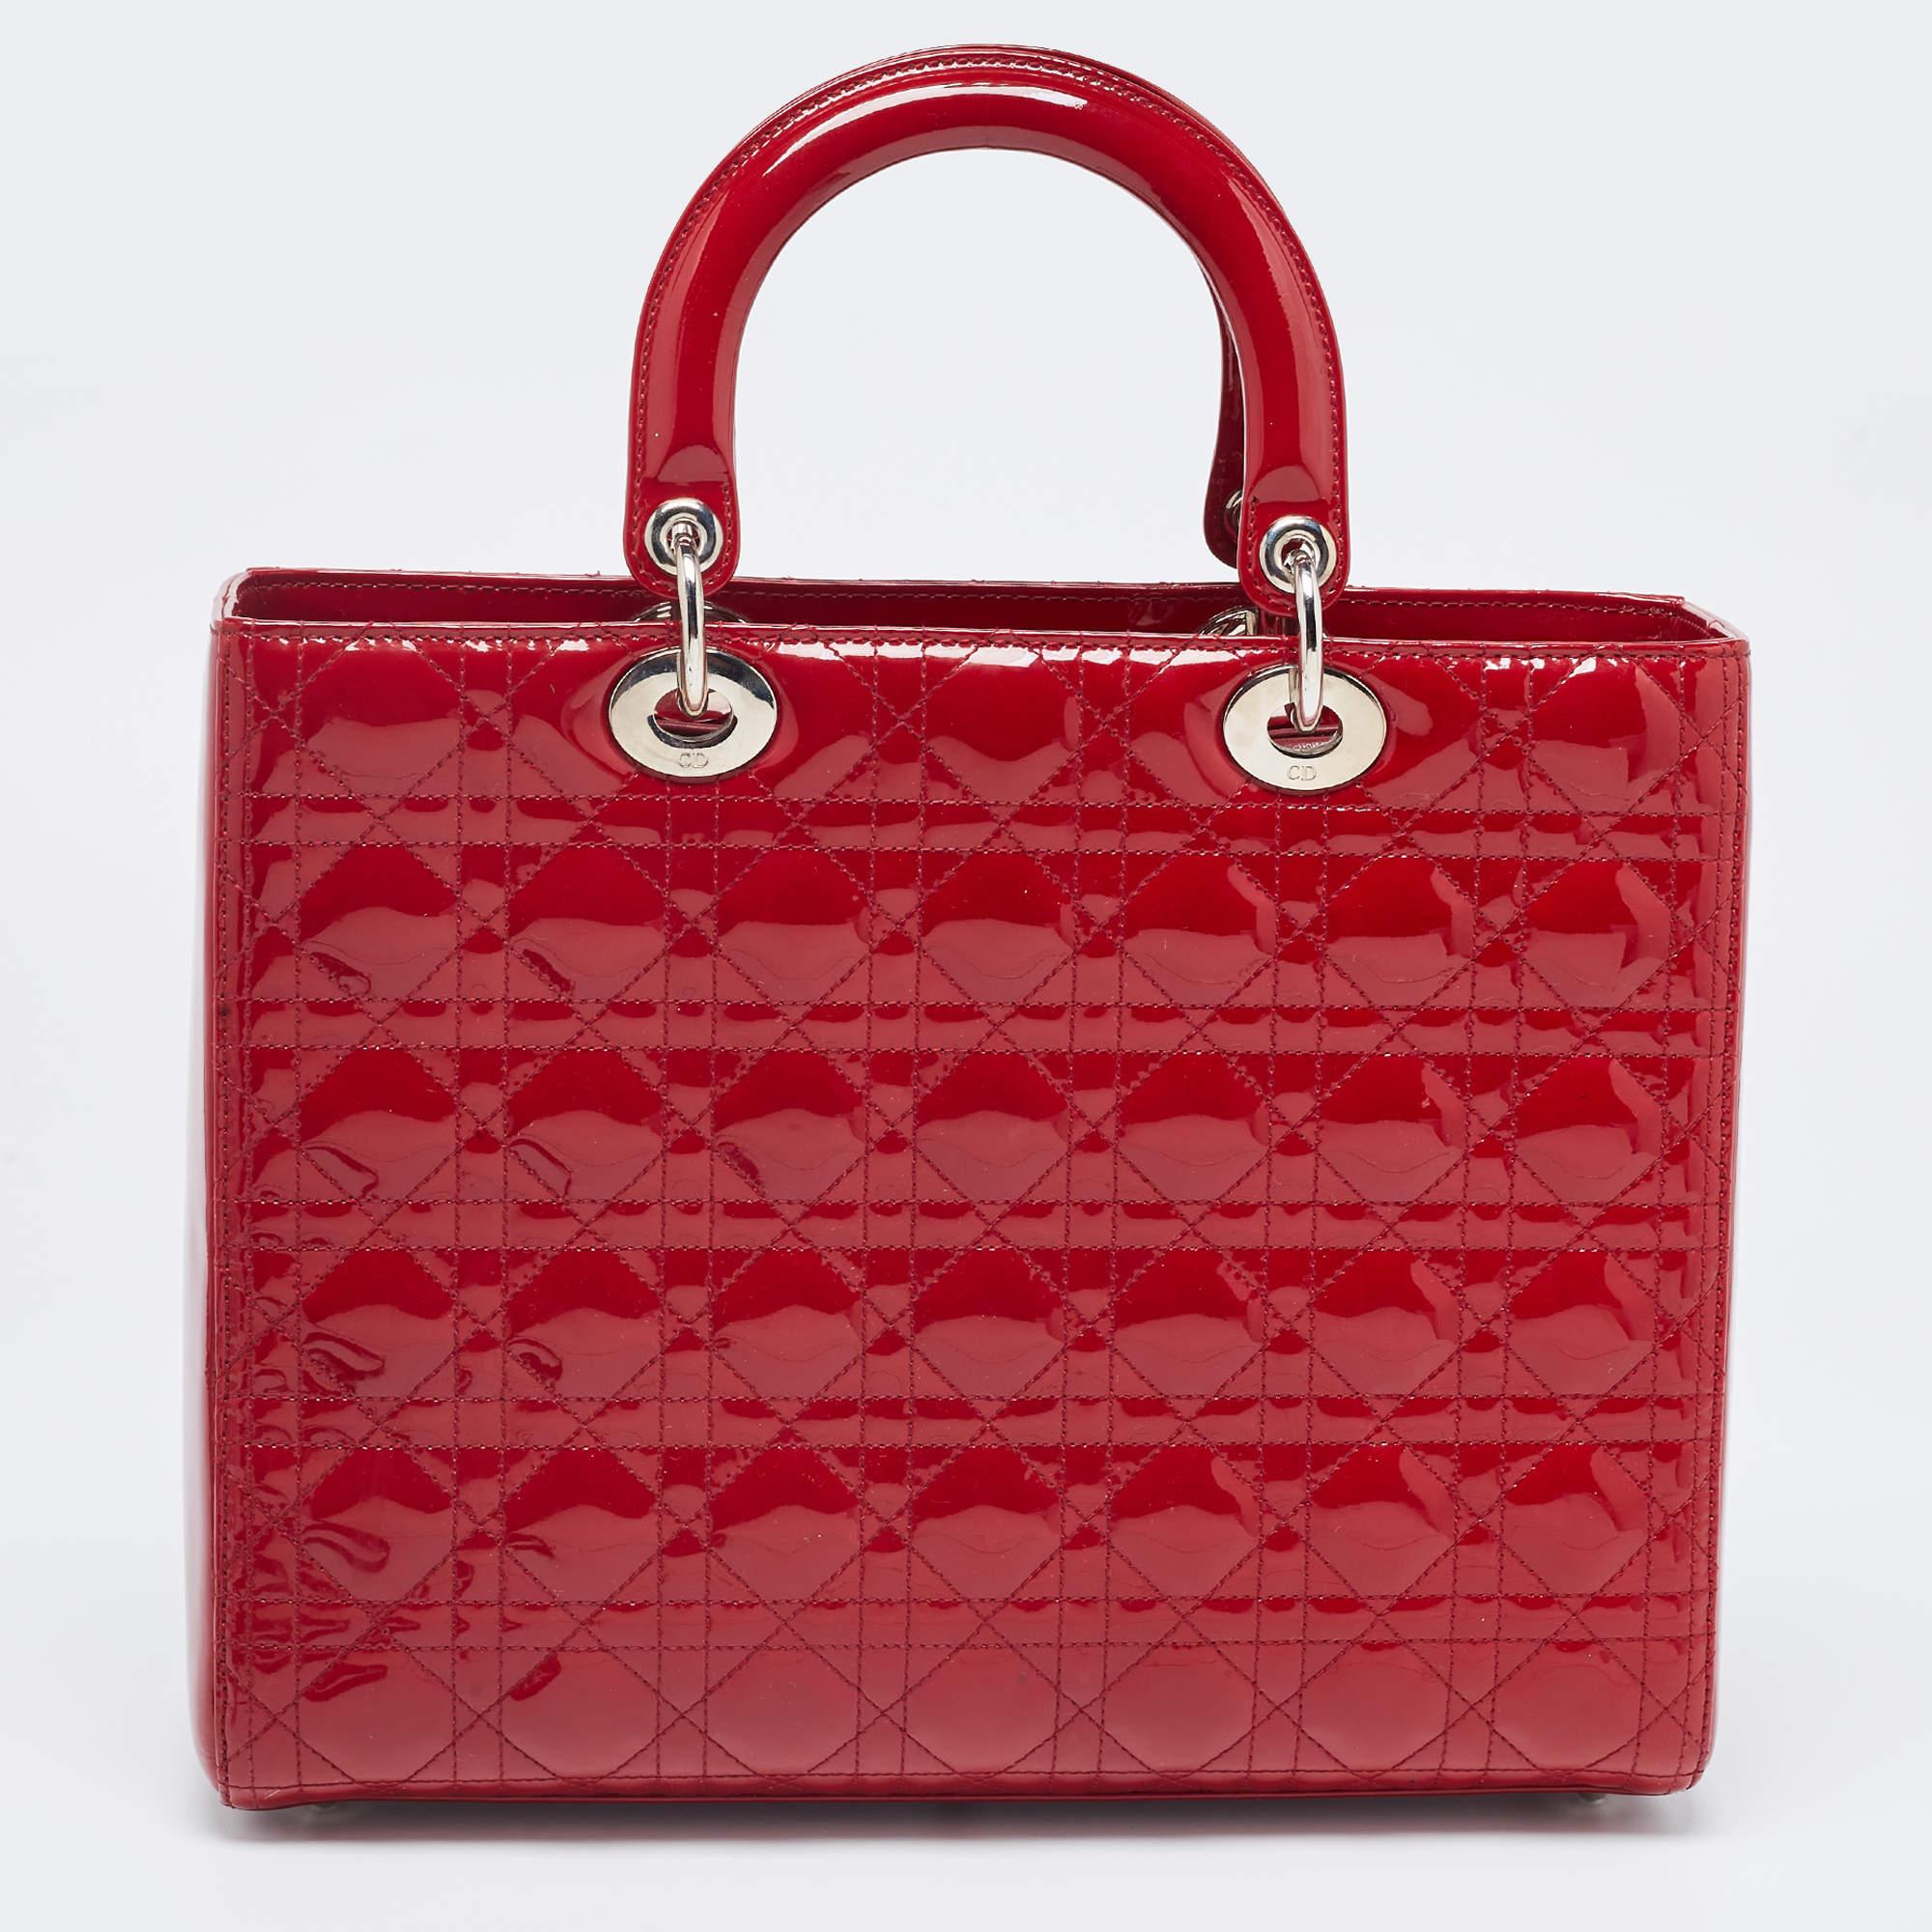 A timeless status and great design mark the Lady Dior tote. It is an iconic bag that people continue to invest in to this day. We have here this large Lady Dior tote crafted from red patent leather. The bag is complete with two top handles, a